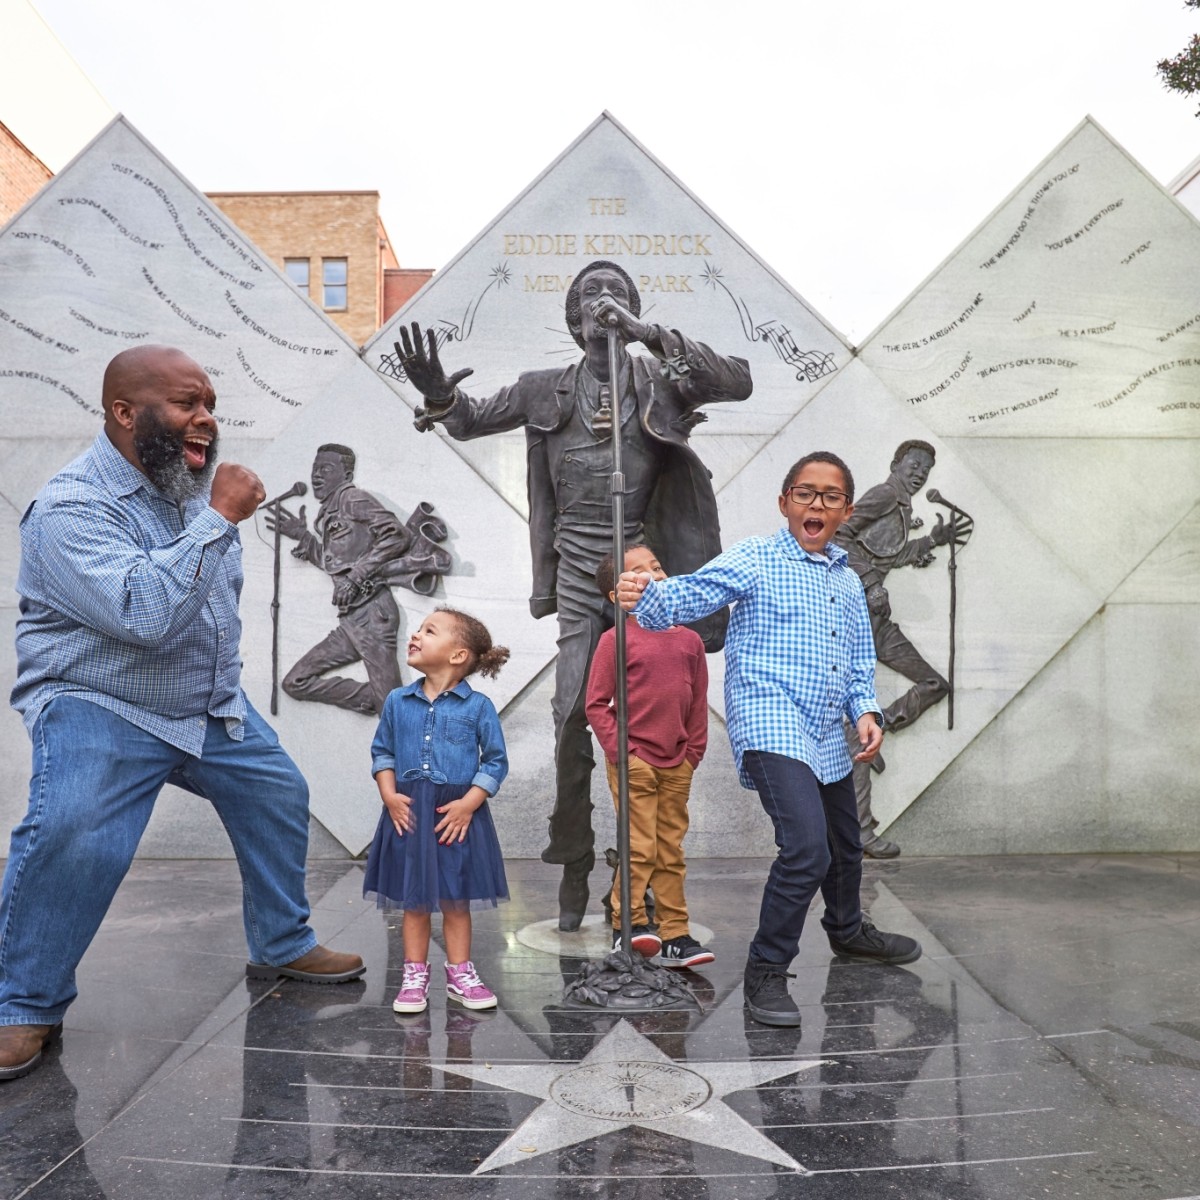 A father and his three young children sing and dance while visiting the Eddie Kendrick Memorial; bronze statues of the singer are visible in the background.